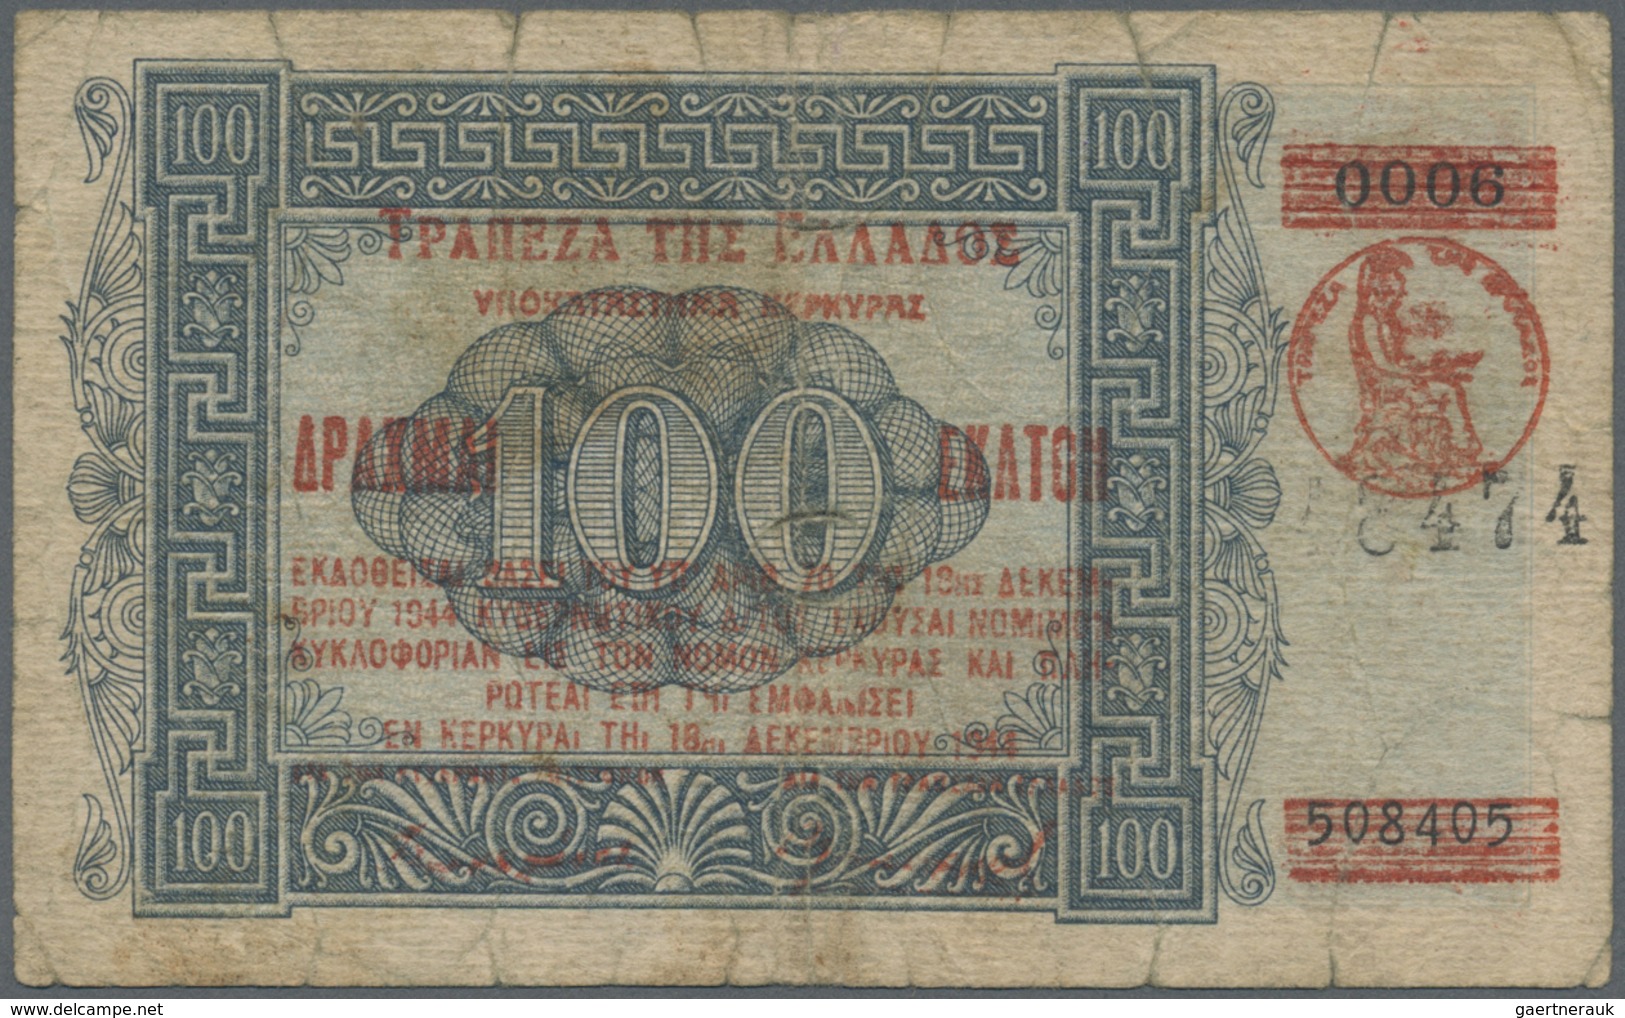 Greece / Griechenland: 100 Drachmai 1944 P. 154, Rare Issue, Used With Several Border Tears, Folds A - Greece